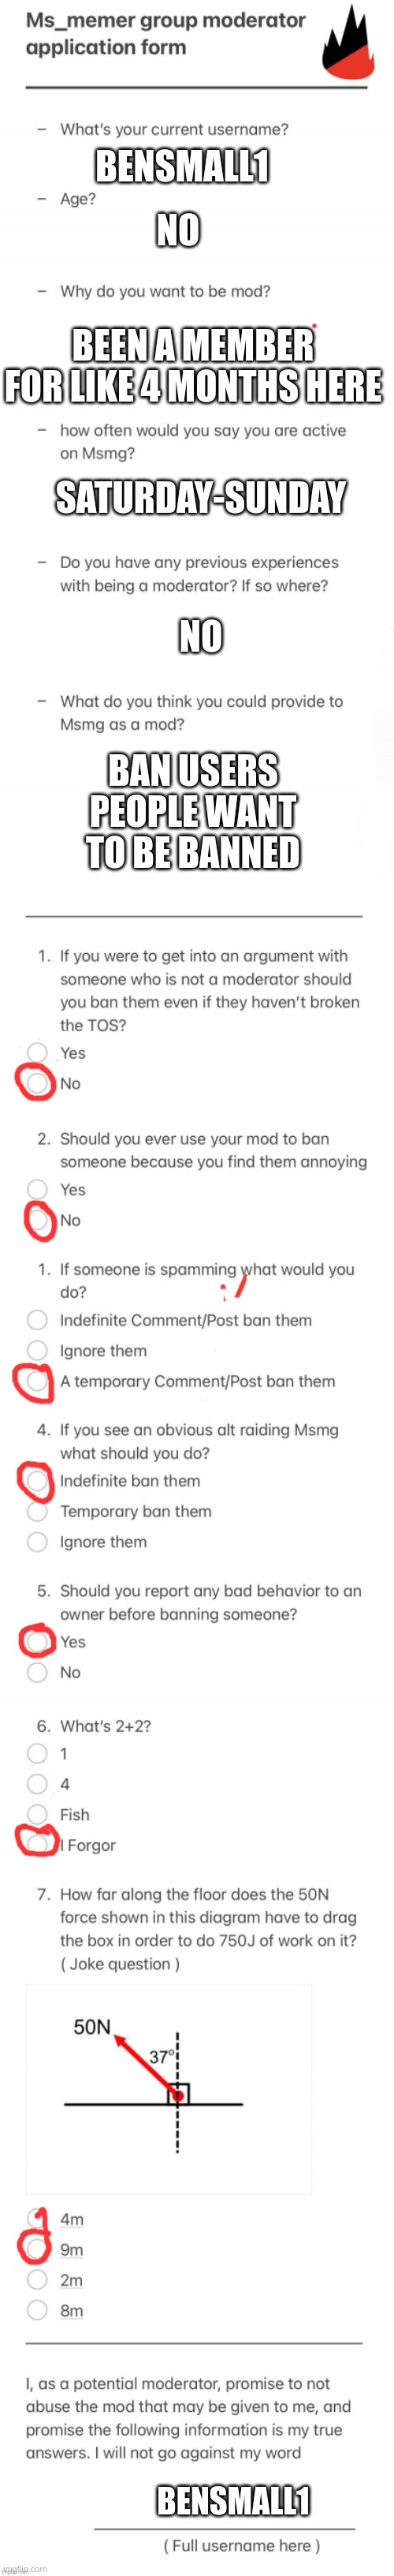 UPDATED MSMG MOD FORM | NO; BENSMALL1; SATURDAY-SUNDAY; BEEN A MEMBER FOR LIKE 4 MONTHS HERE; NO; BAN USERS PEOPLE WANT TO BE BANNED; BENSMALL1 | image tagged in updated msmg mod form | made w/ Imgflip meme maker